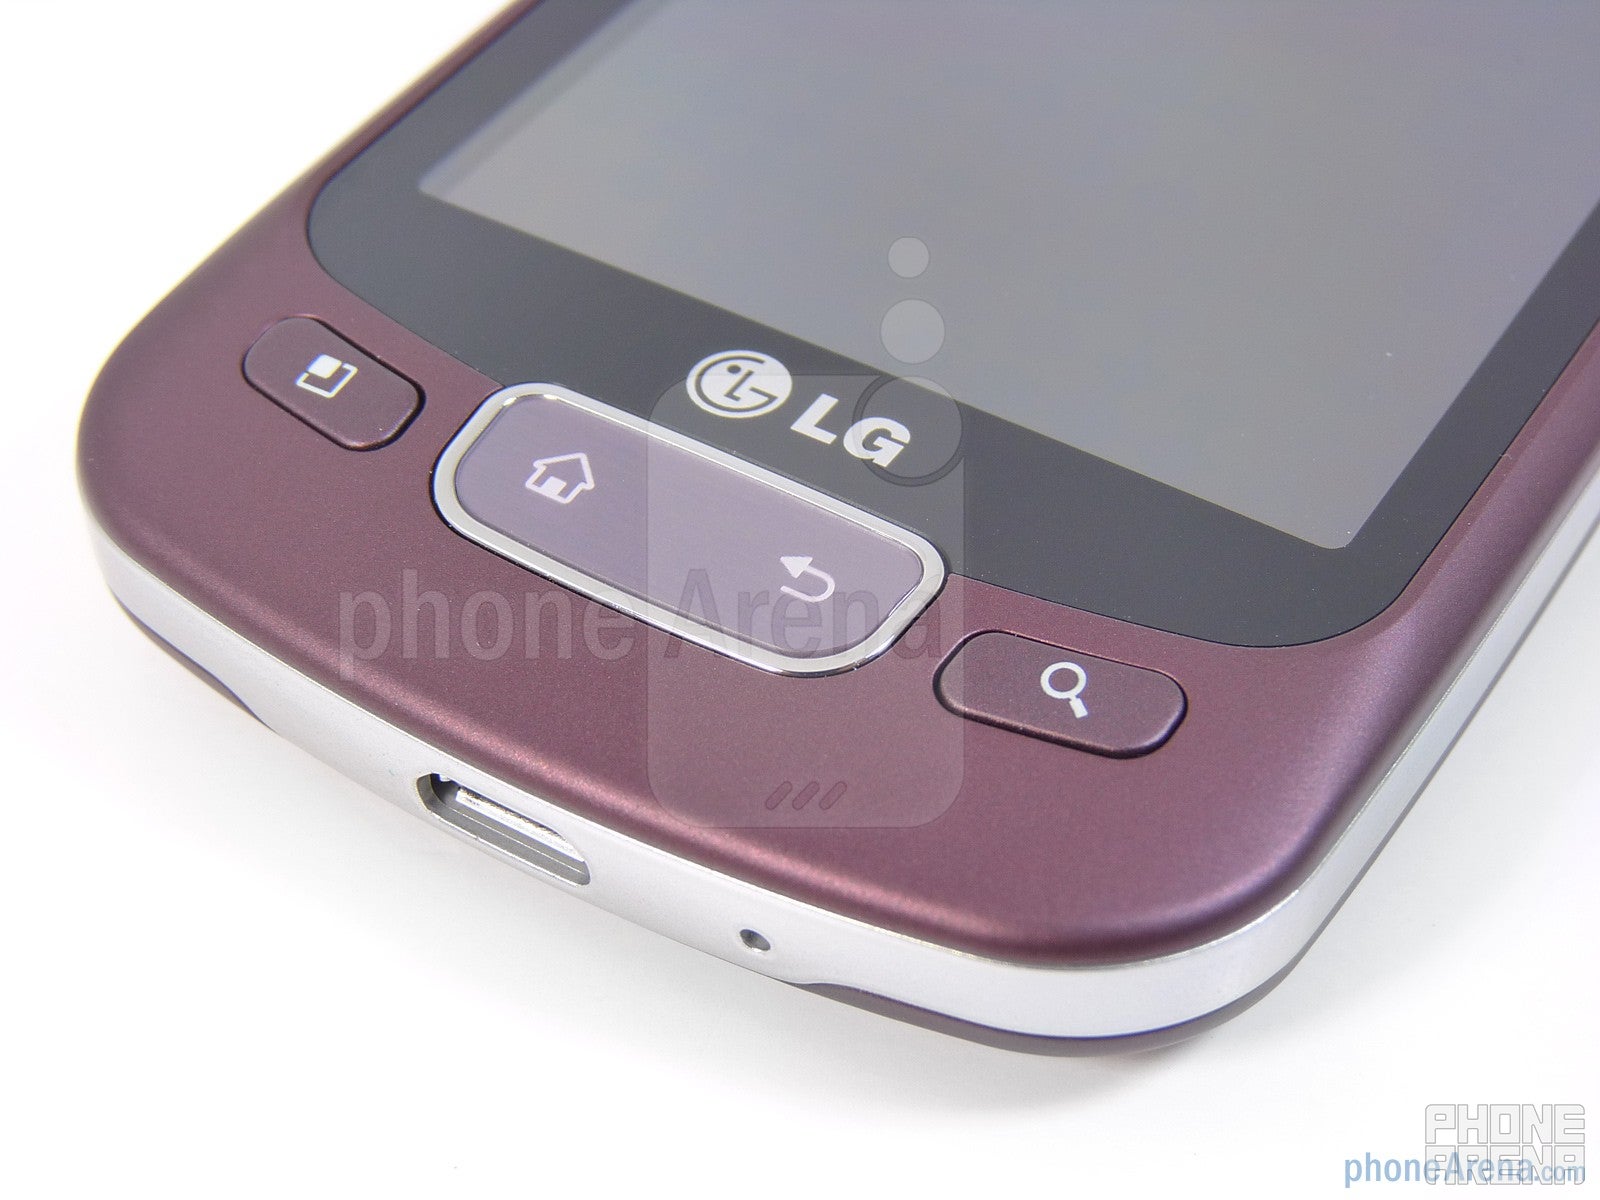 Physical buttons - LG Optimus T Review